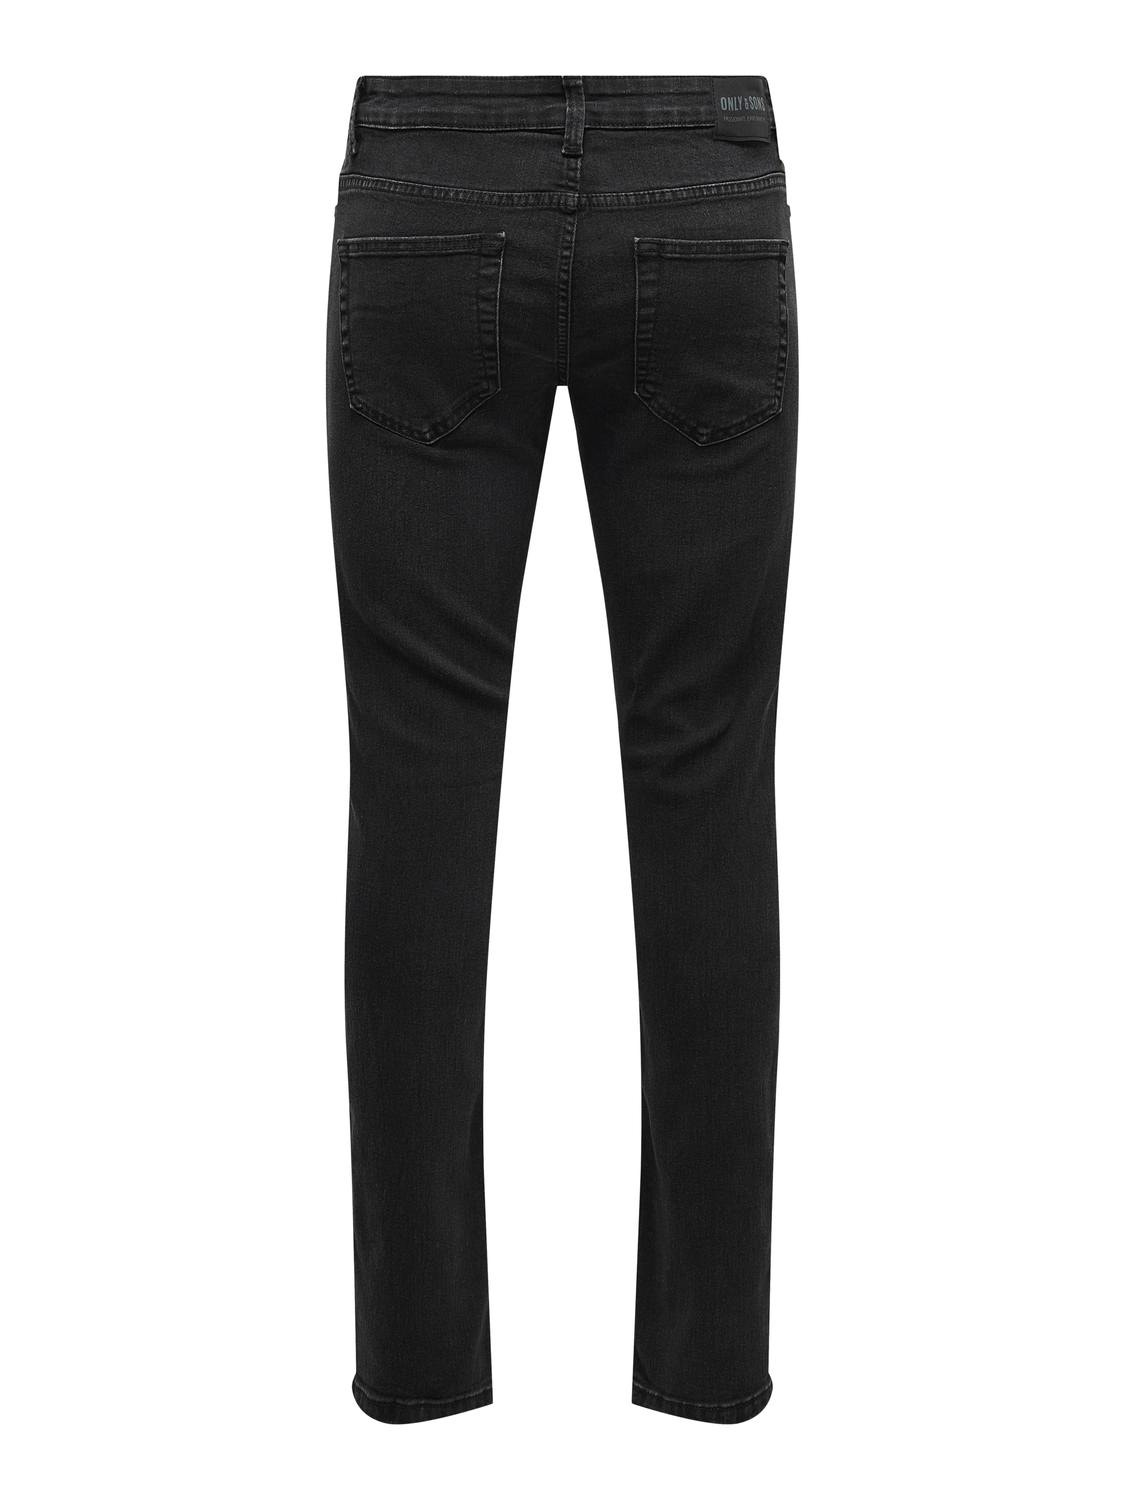 ONLY & SONS Slim Fit Mittlere Taille Jeans -Black Denim - 22027841